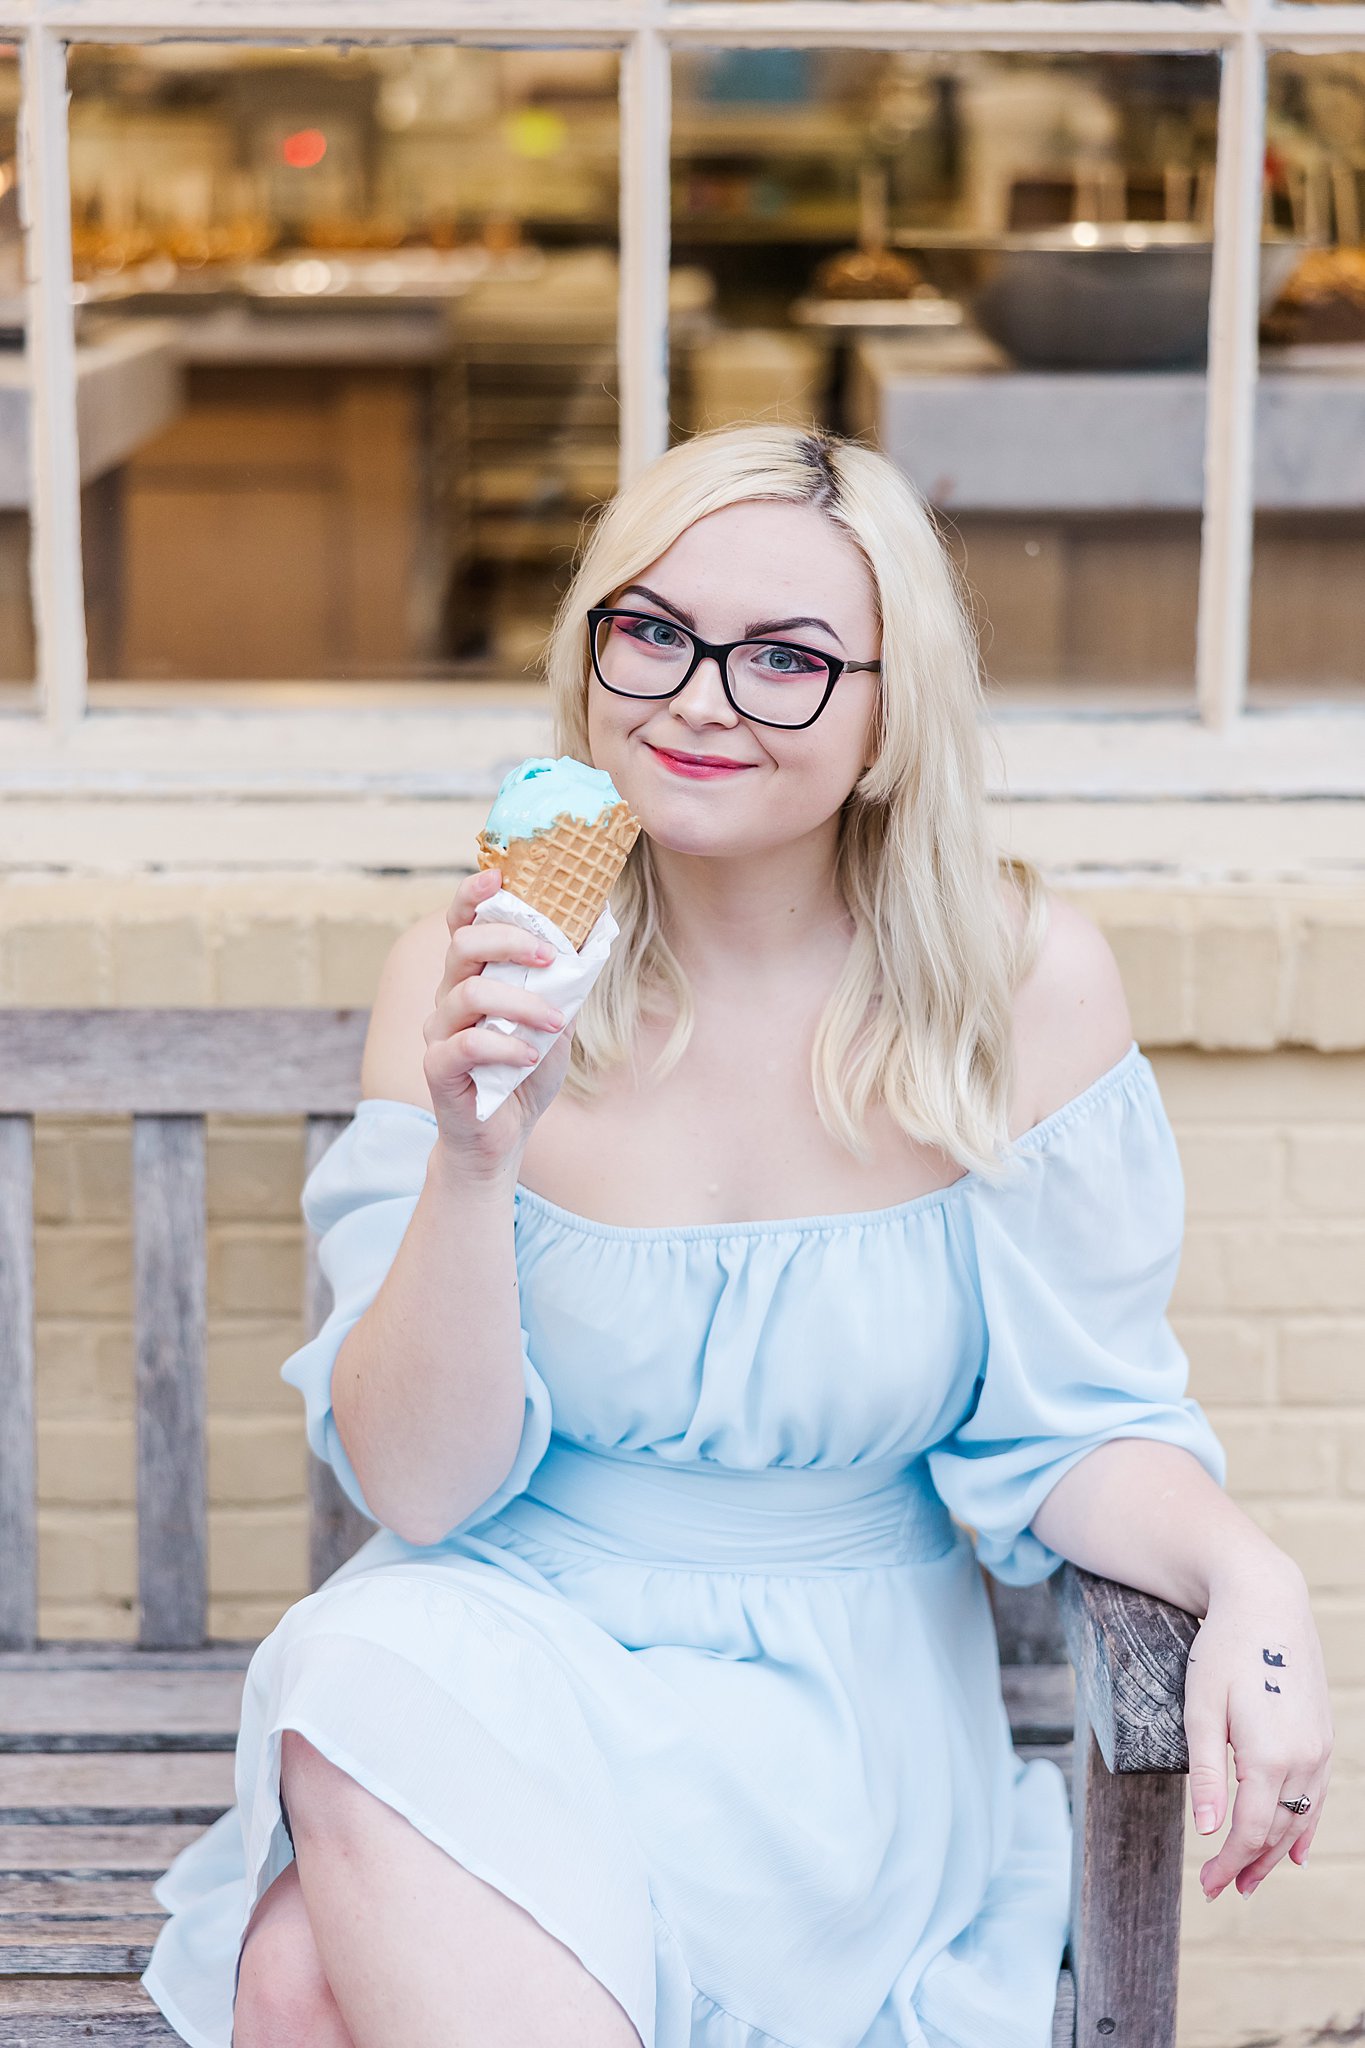 fun senior images express you - ice cream, art, music, whatever floats your boat!